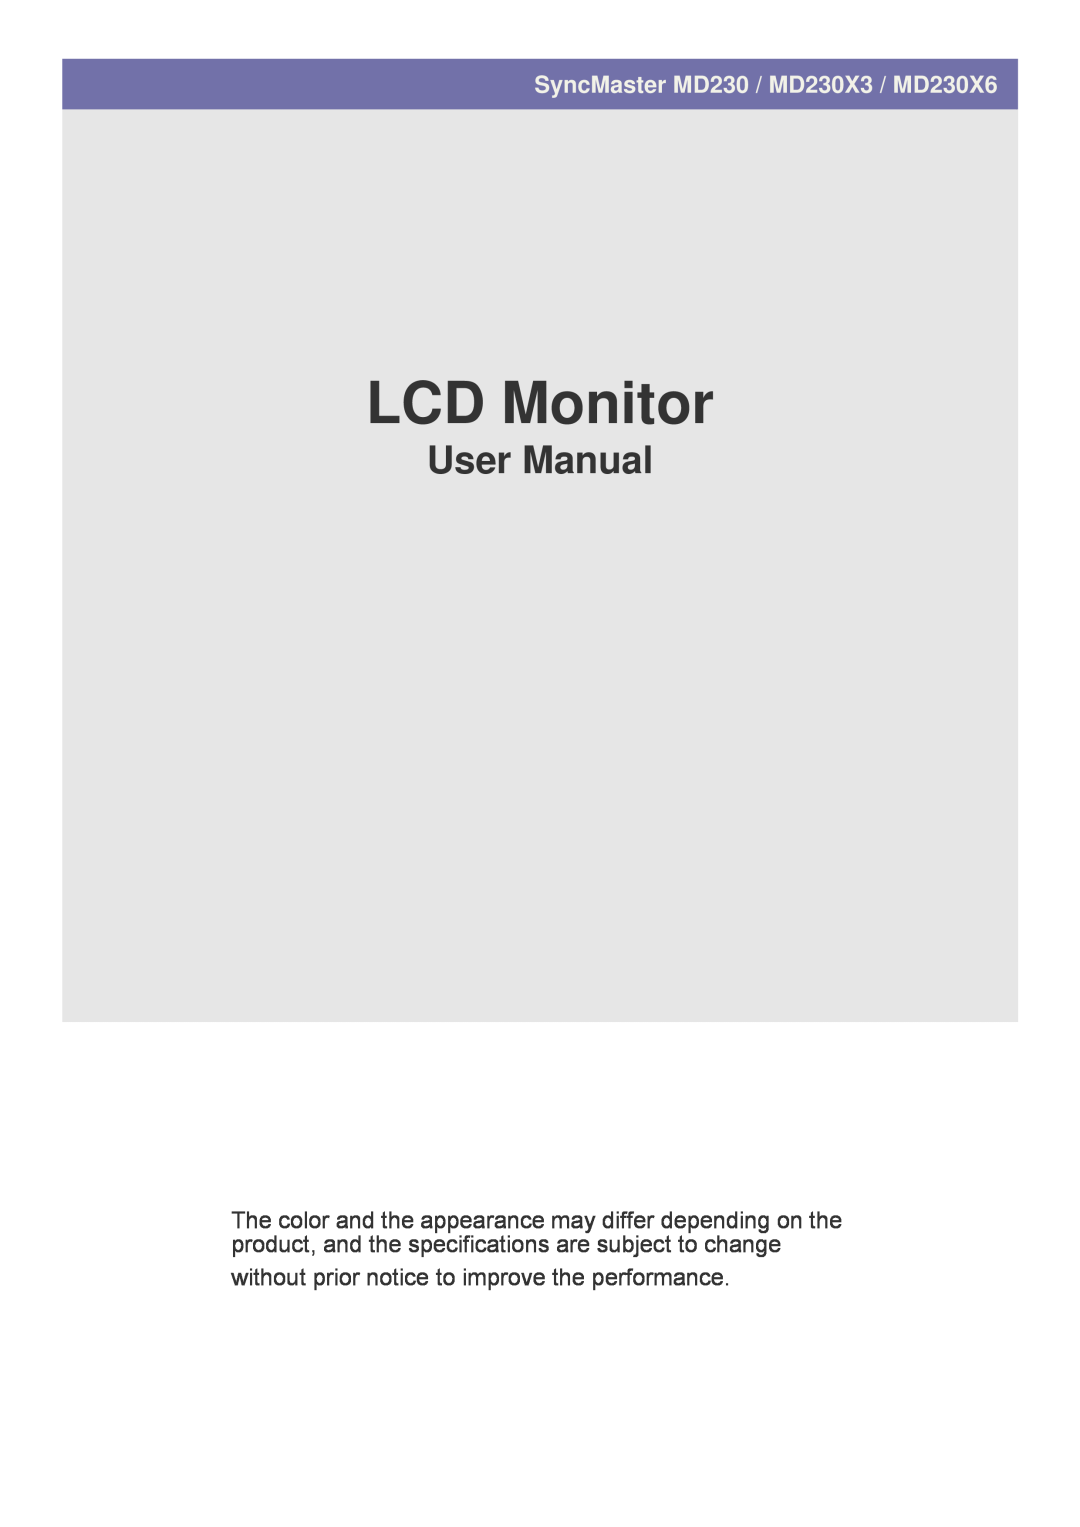 Samsung user manual LCD Monitor, User Manual, SyncMaster MD230 / MD230X3 / MD230X6 